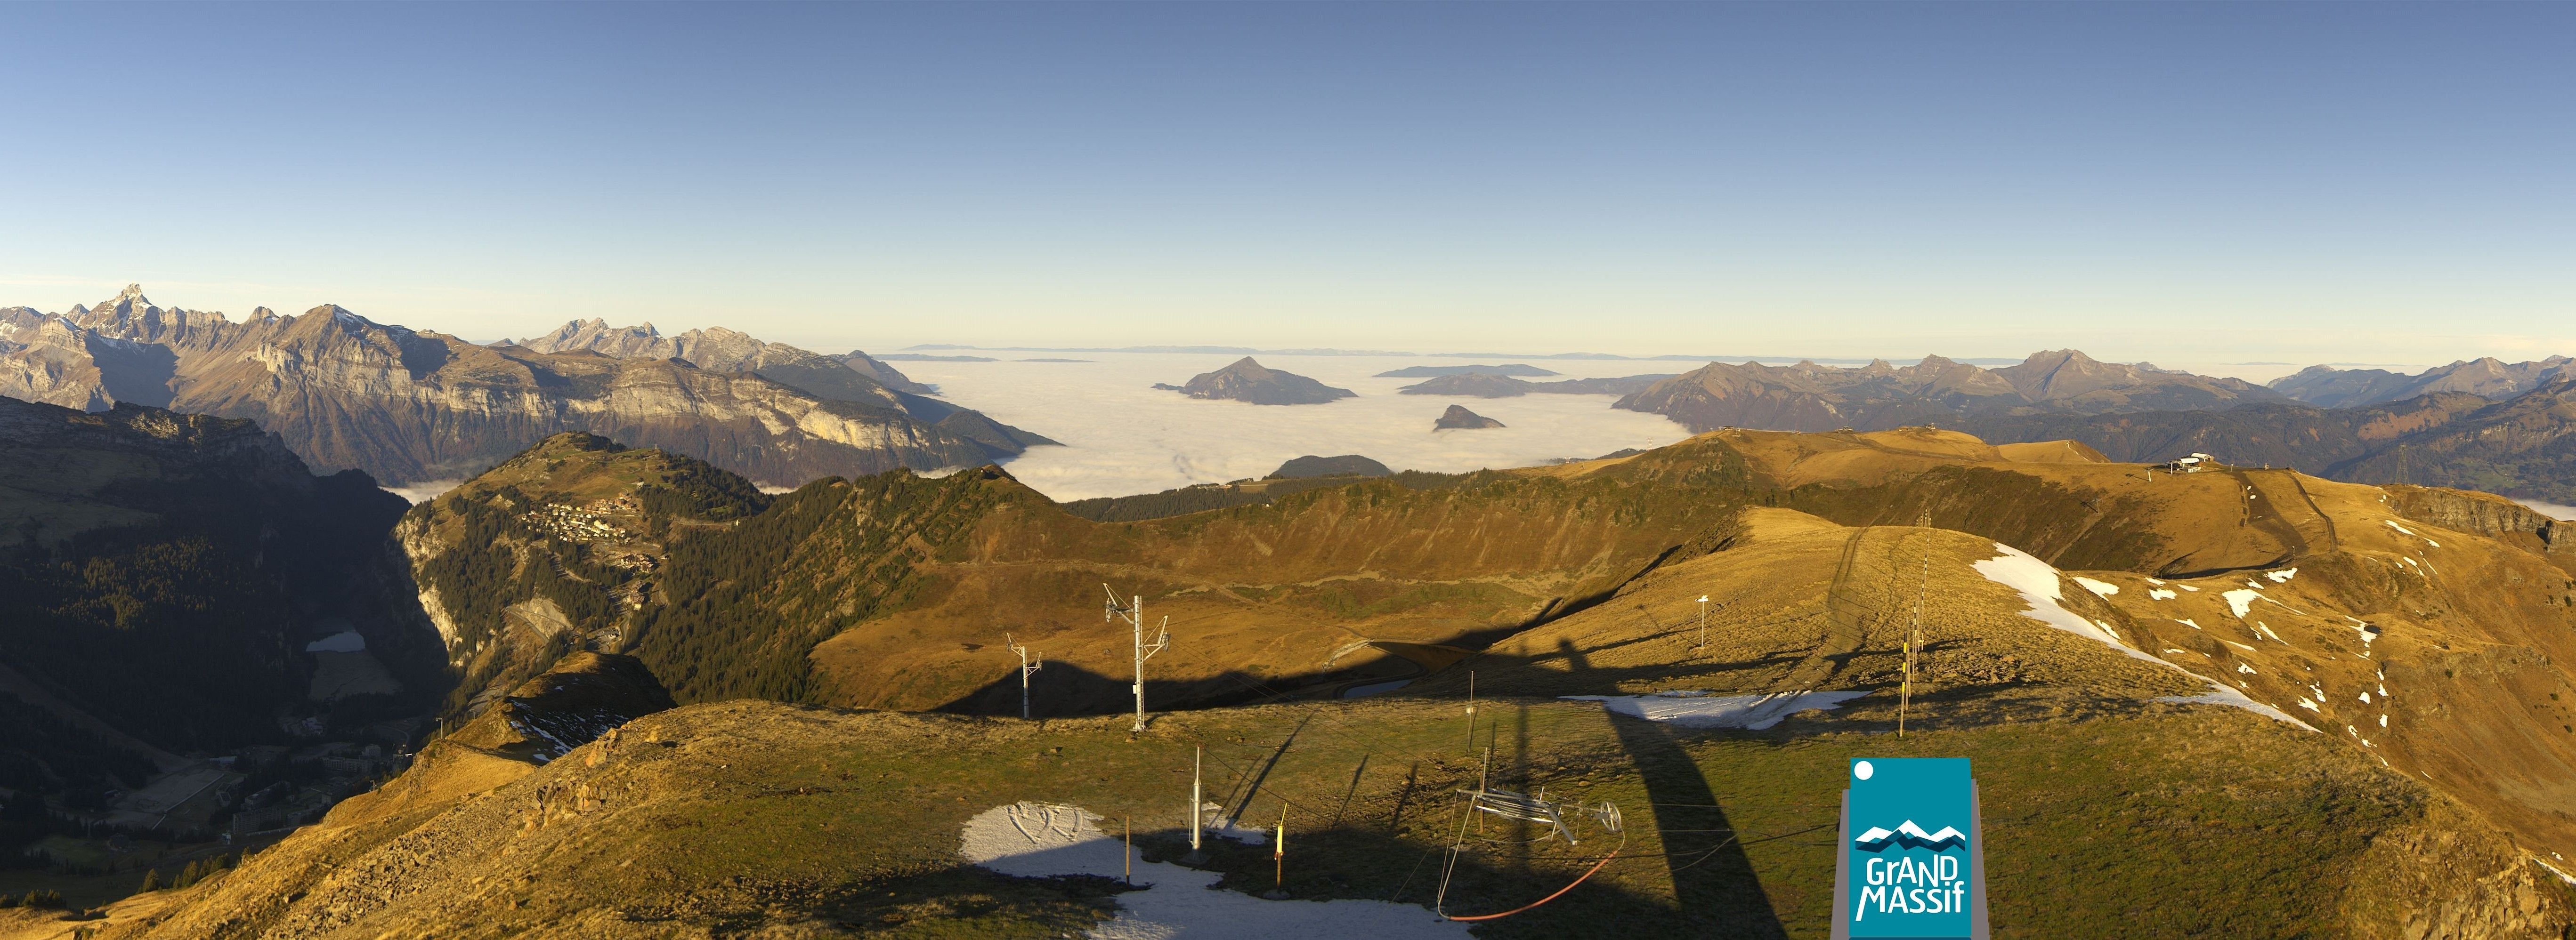 An image that we will see more in the Alps in the coming days: sunny in the high alpine and a cloud soup in the valleys